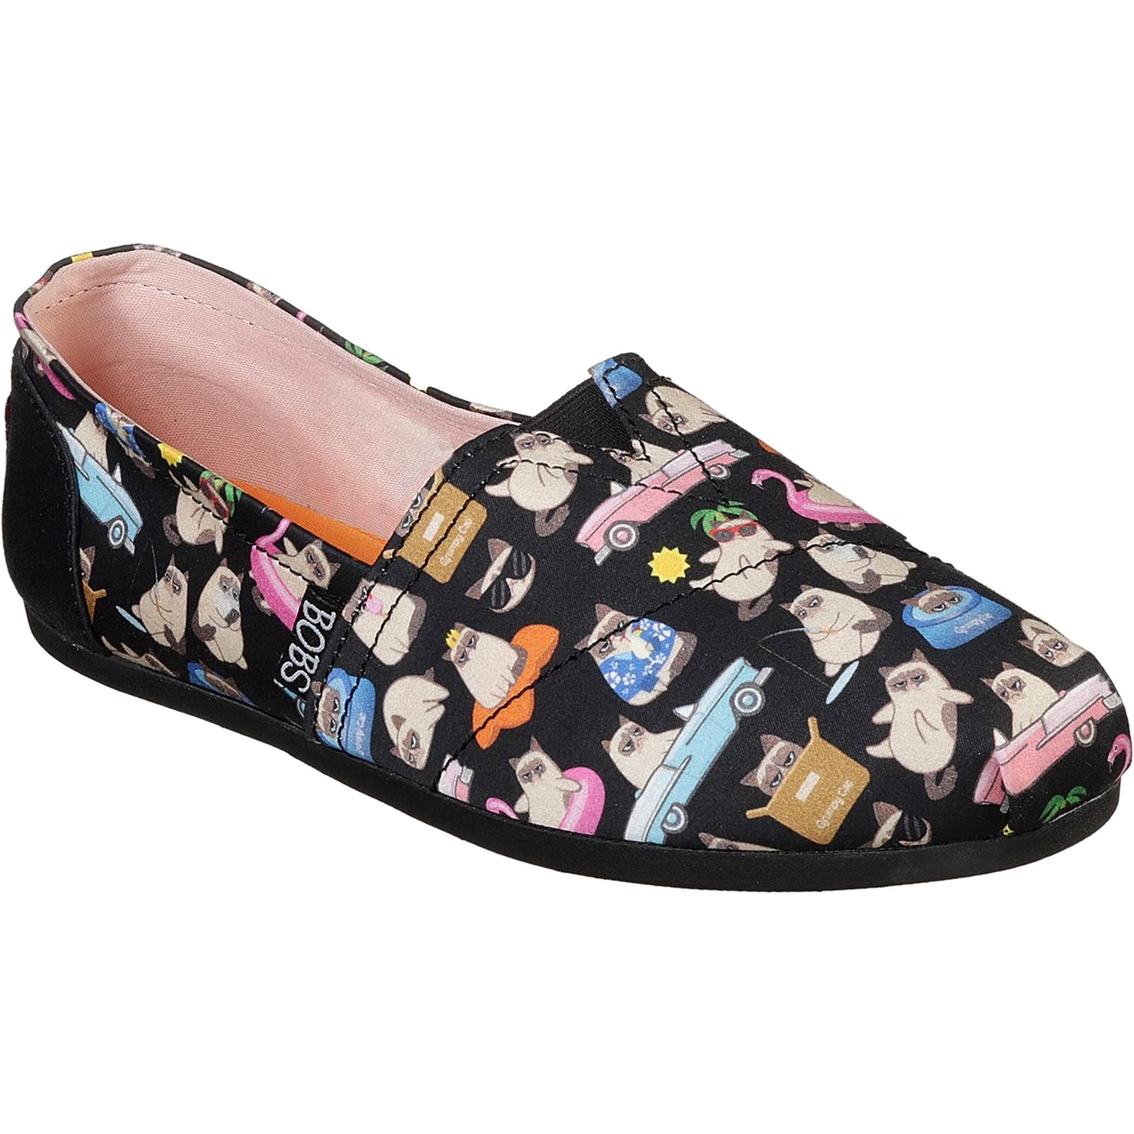 skechers shoes with cats 